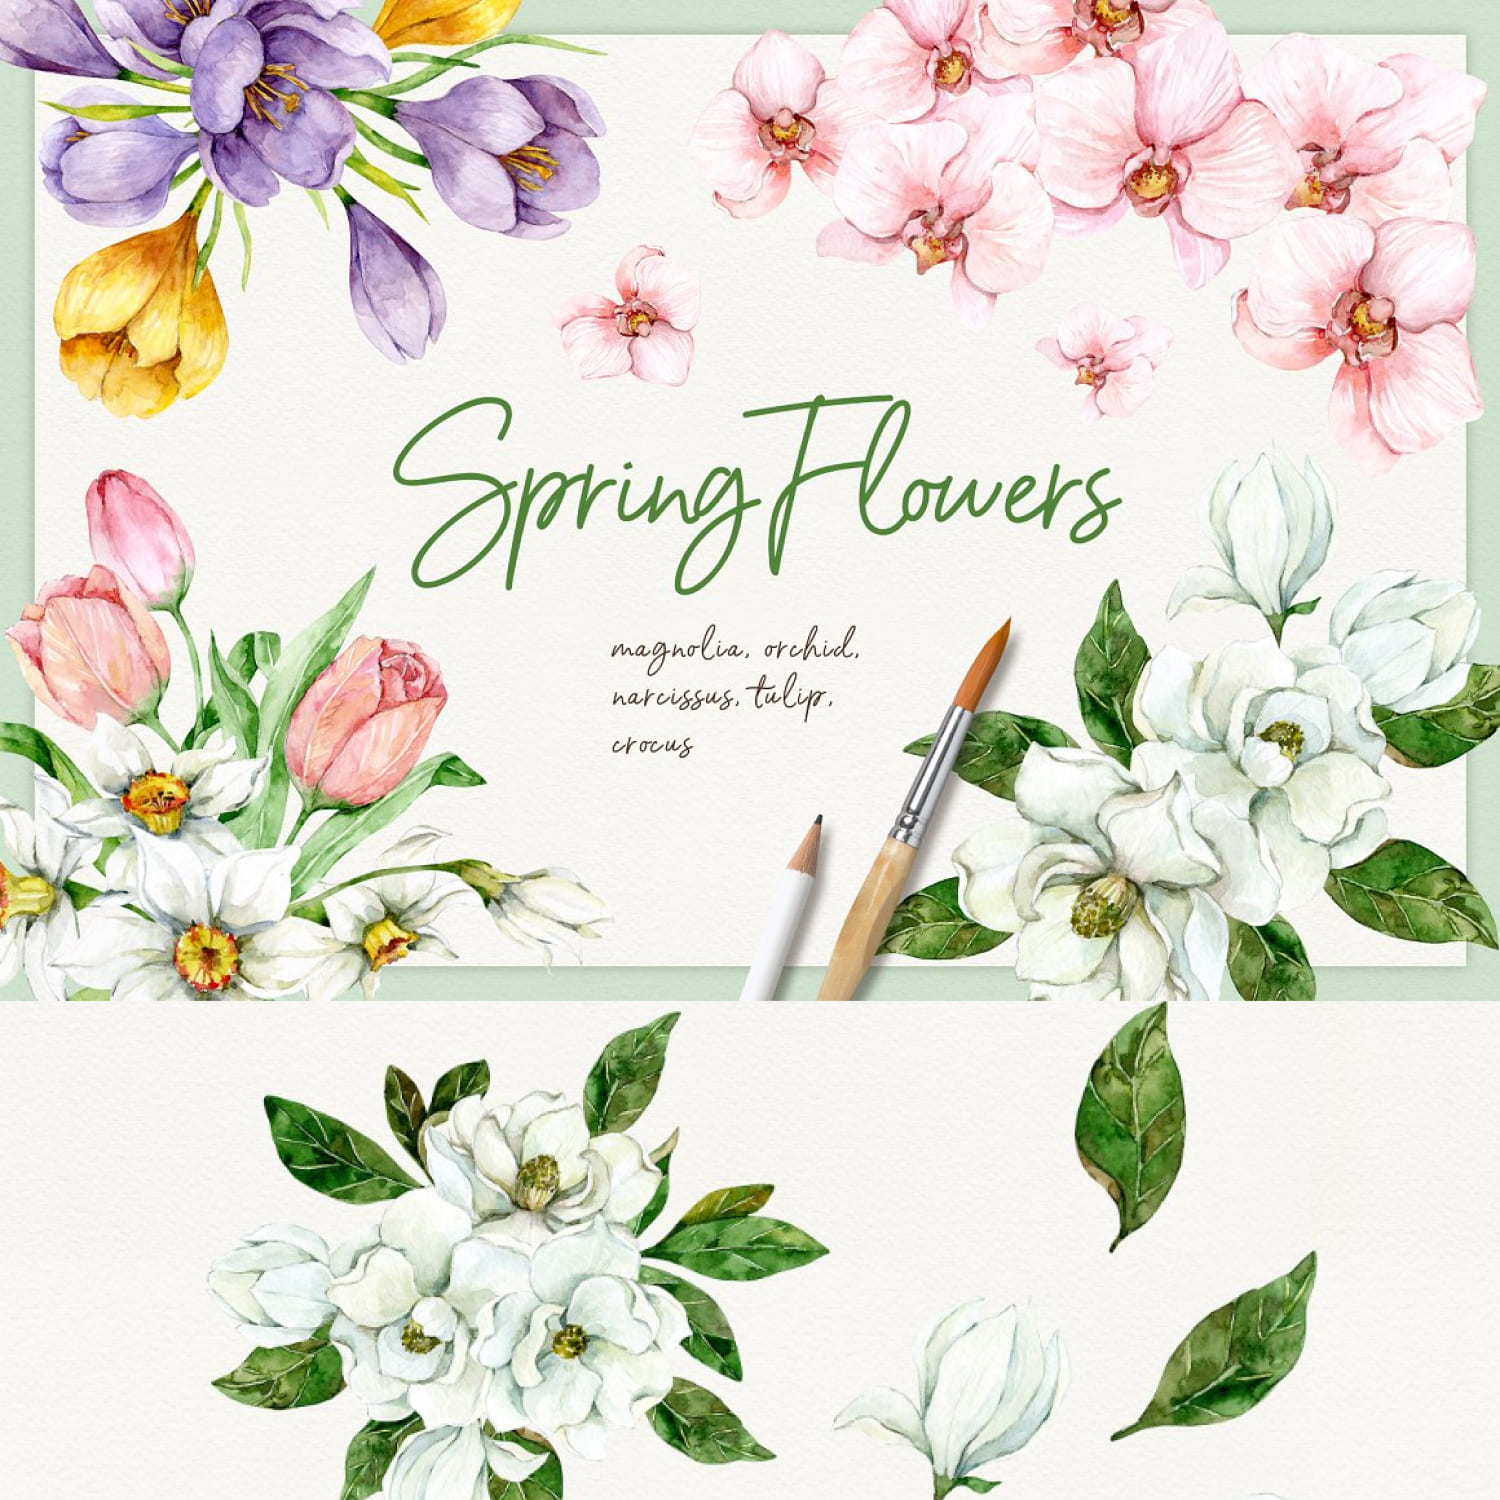 Spring Flowers - Watercolor Clipart cover image.